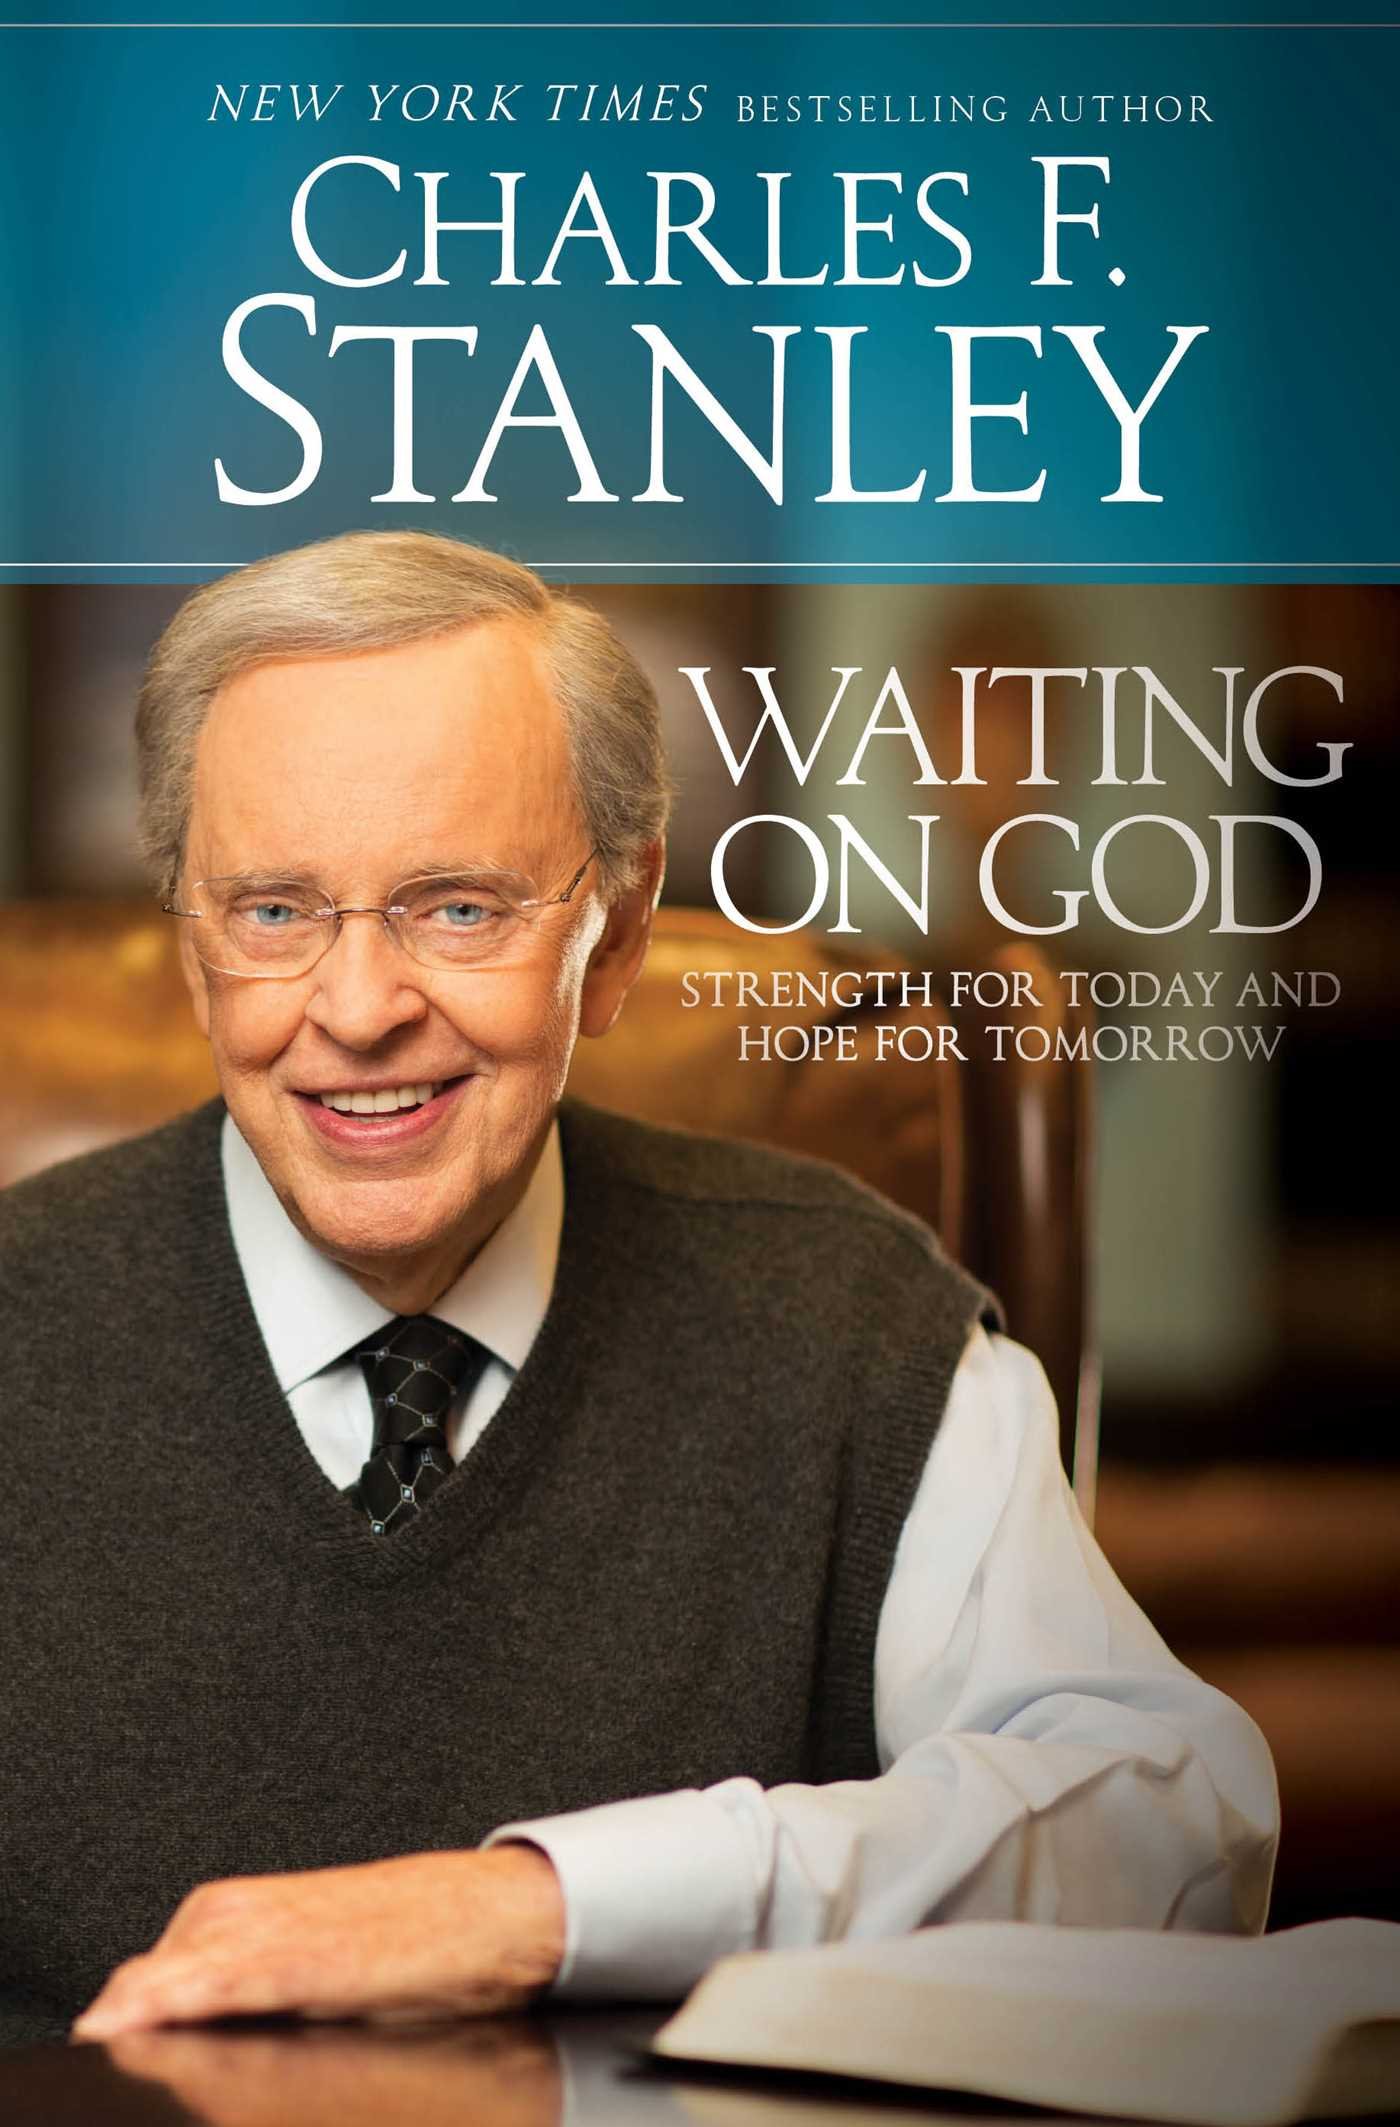 Charles Stanley “Waiting on God” Book Signing Book Signing Central